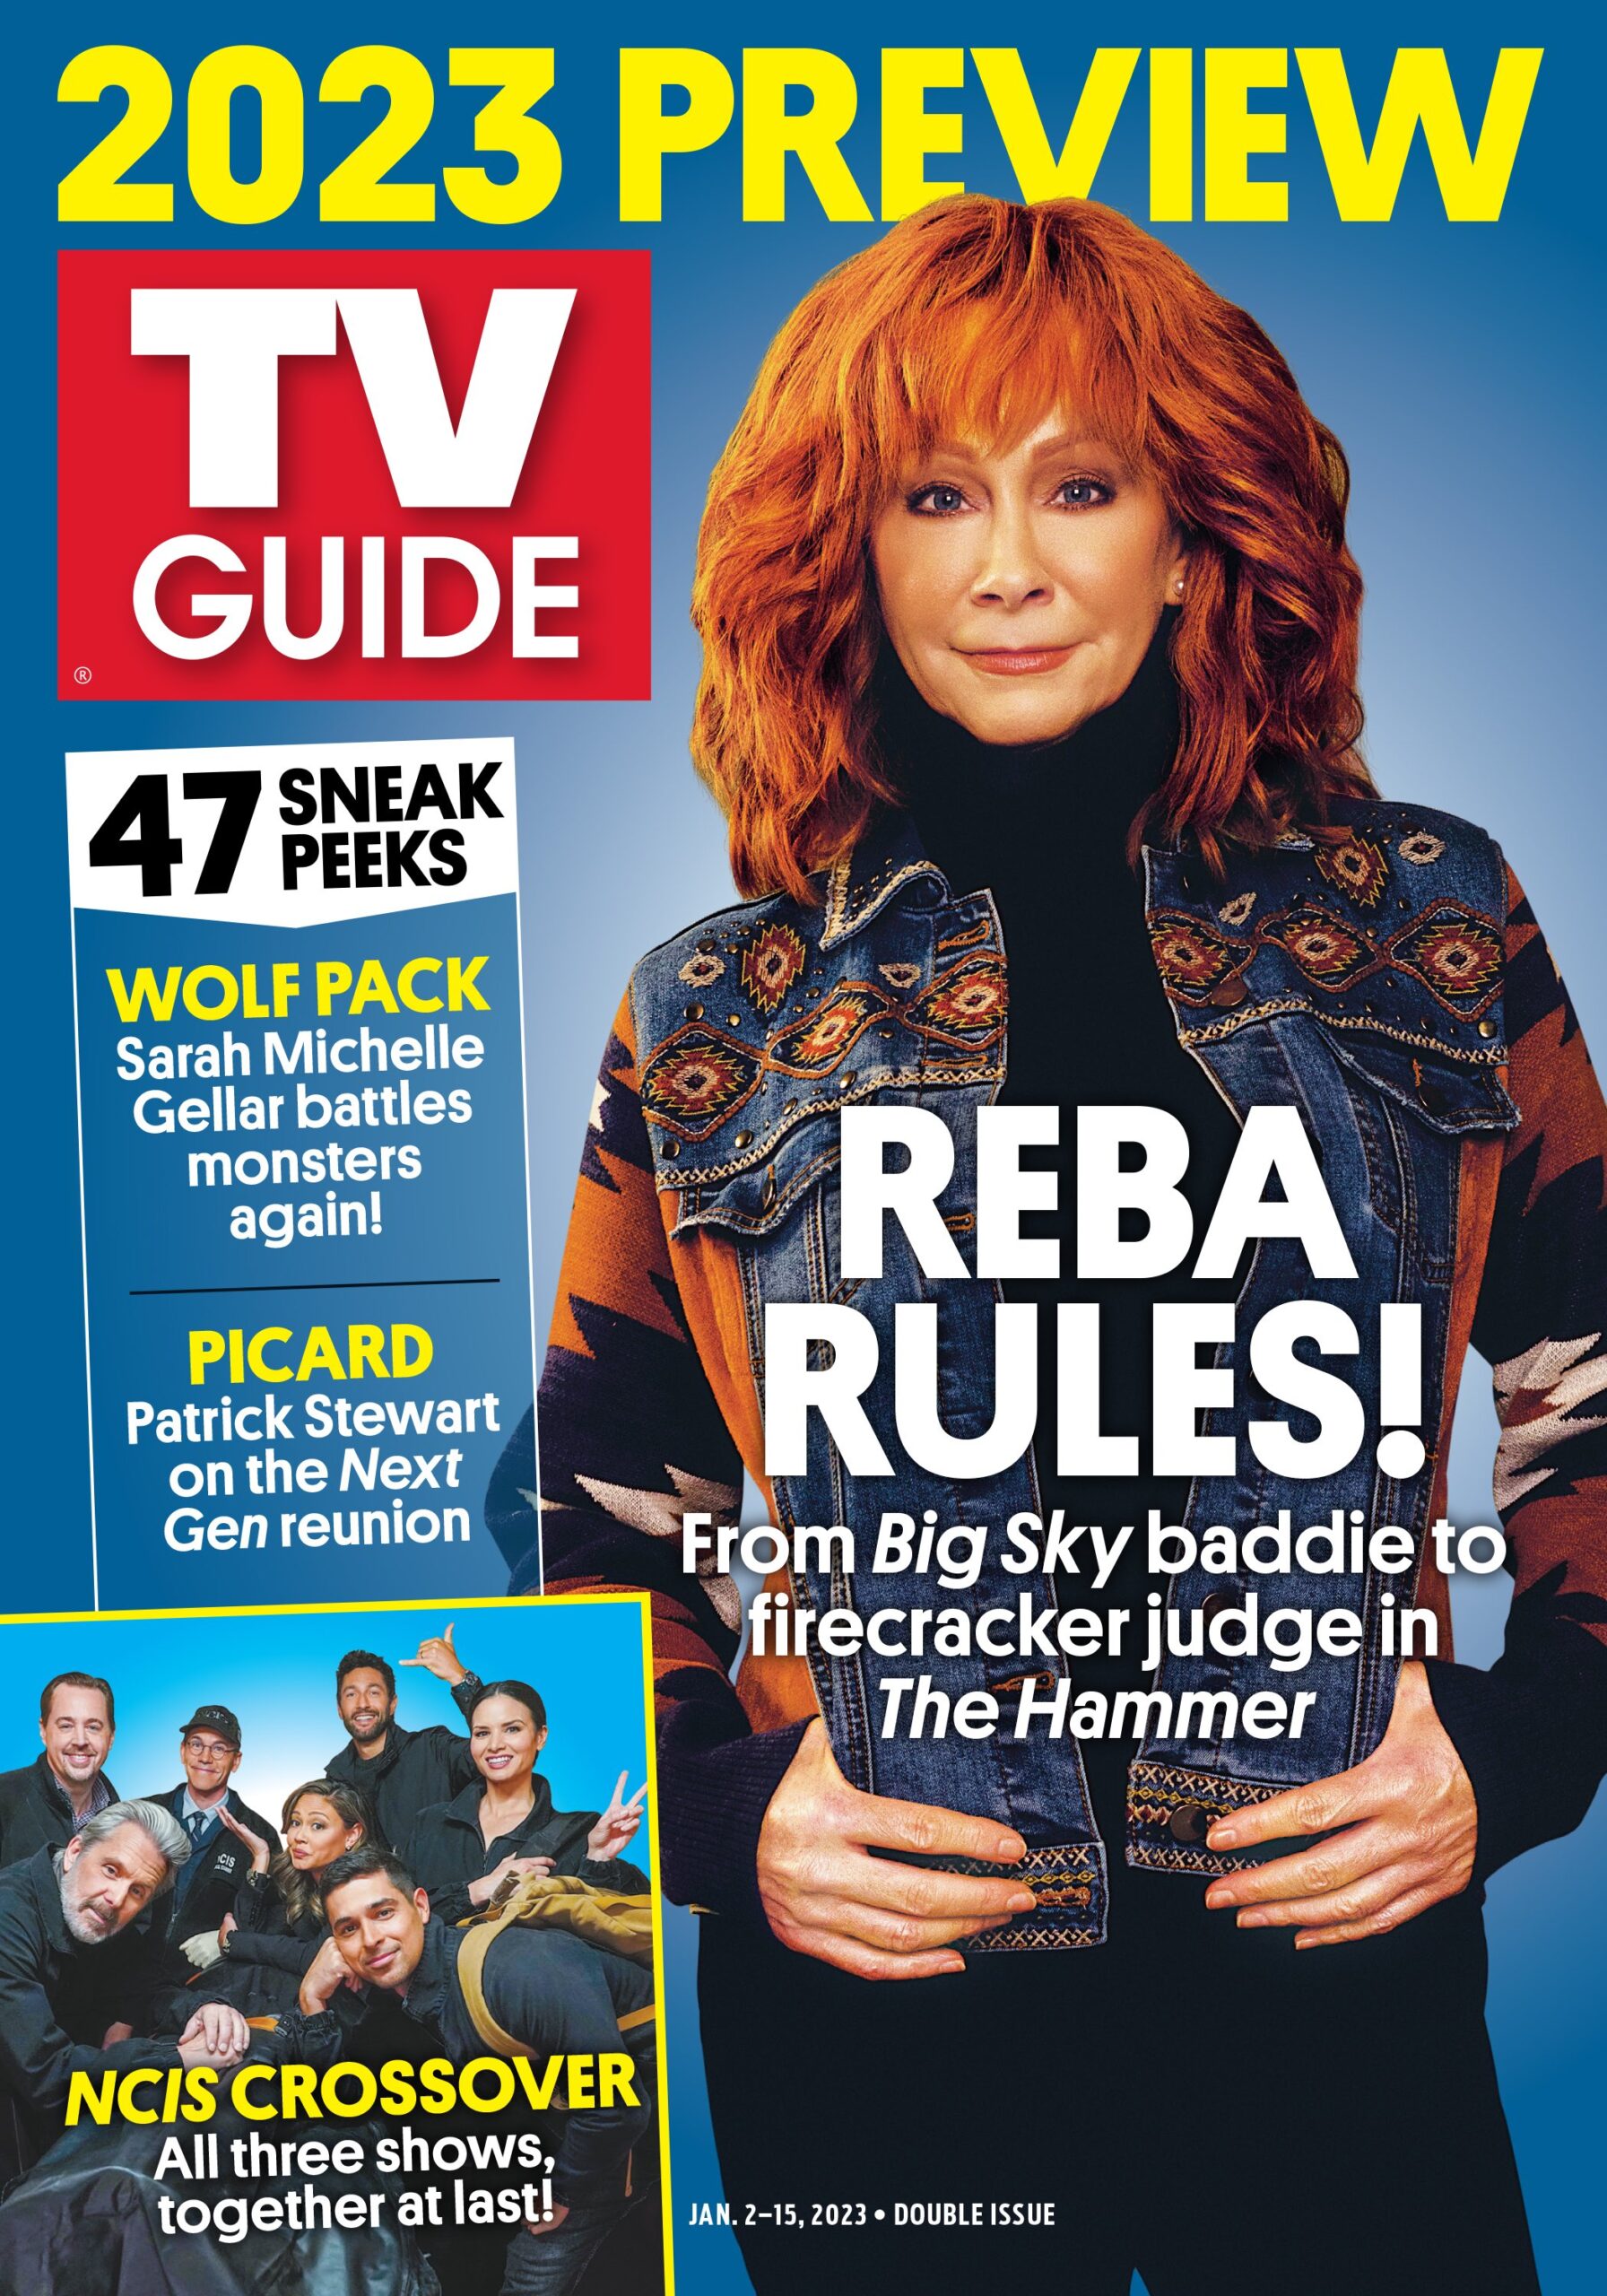 2023 PREVIEW The official site of TV Guide Magazine